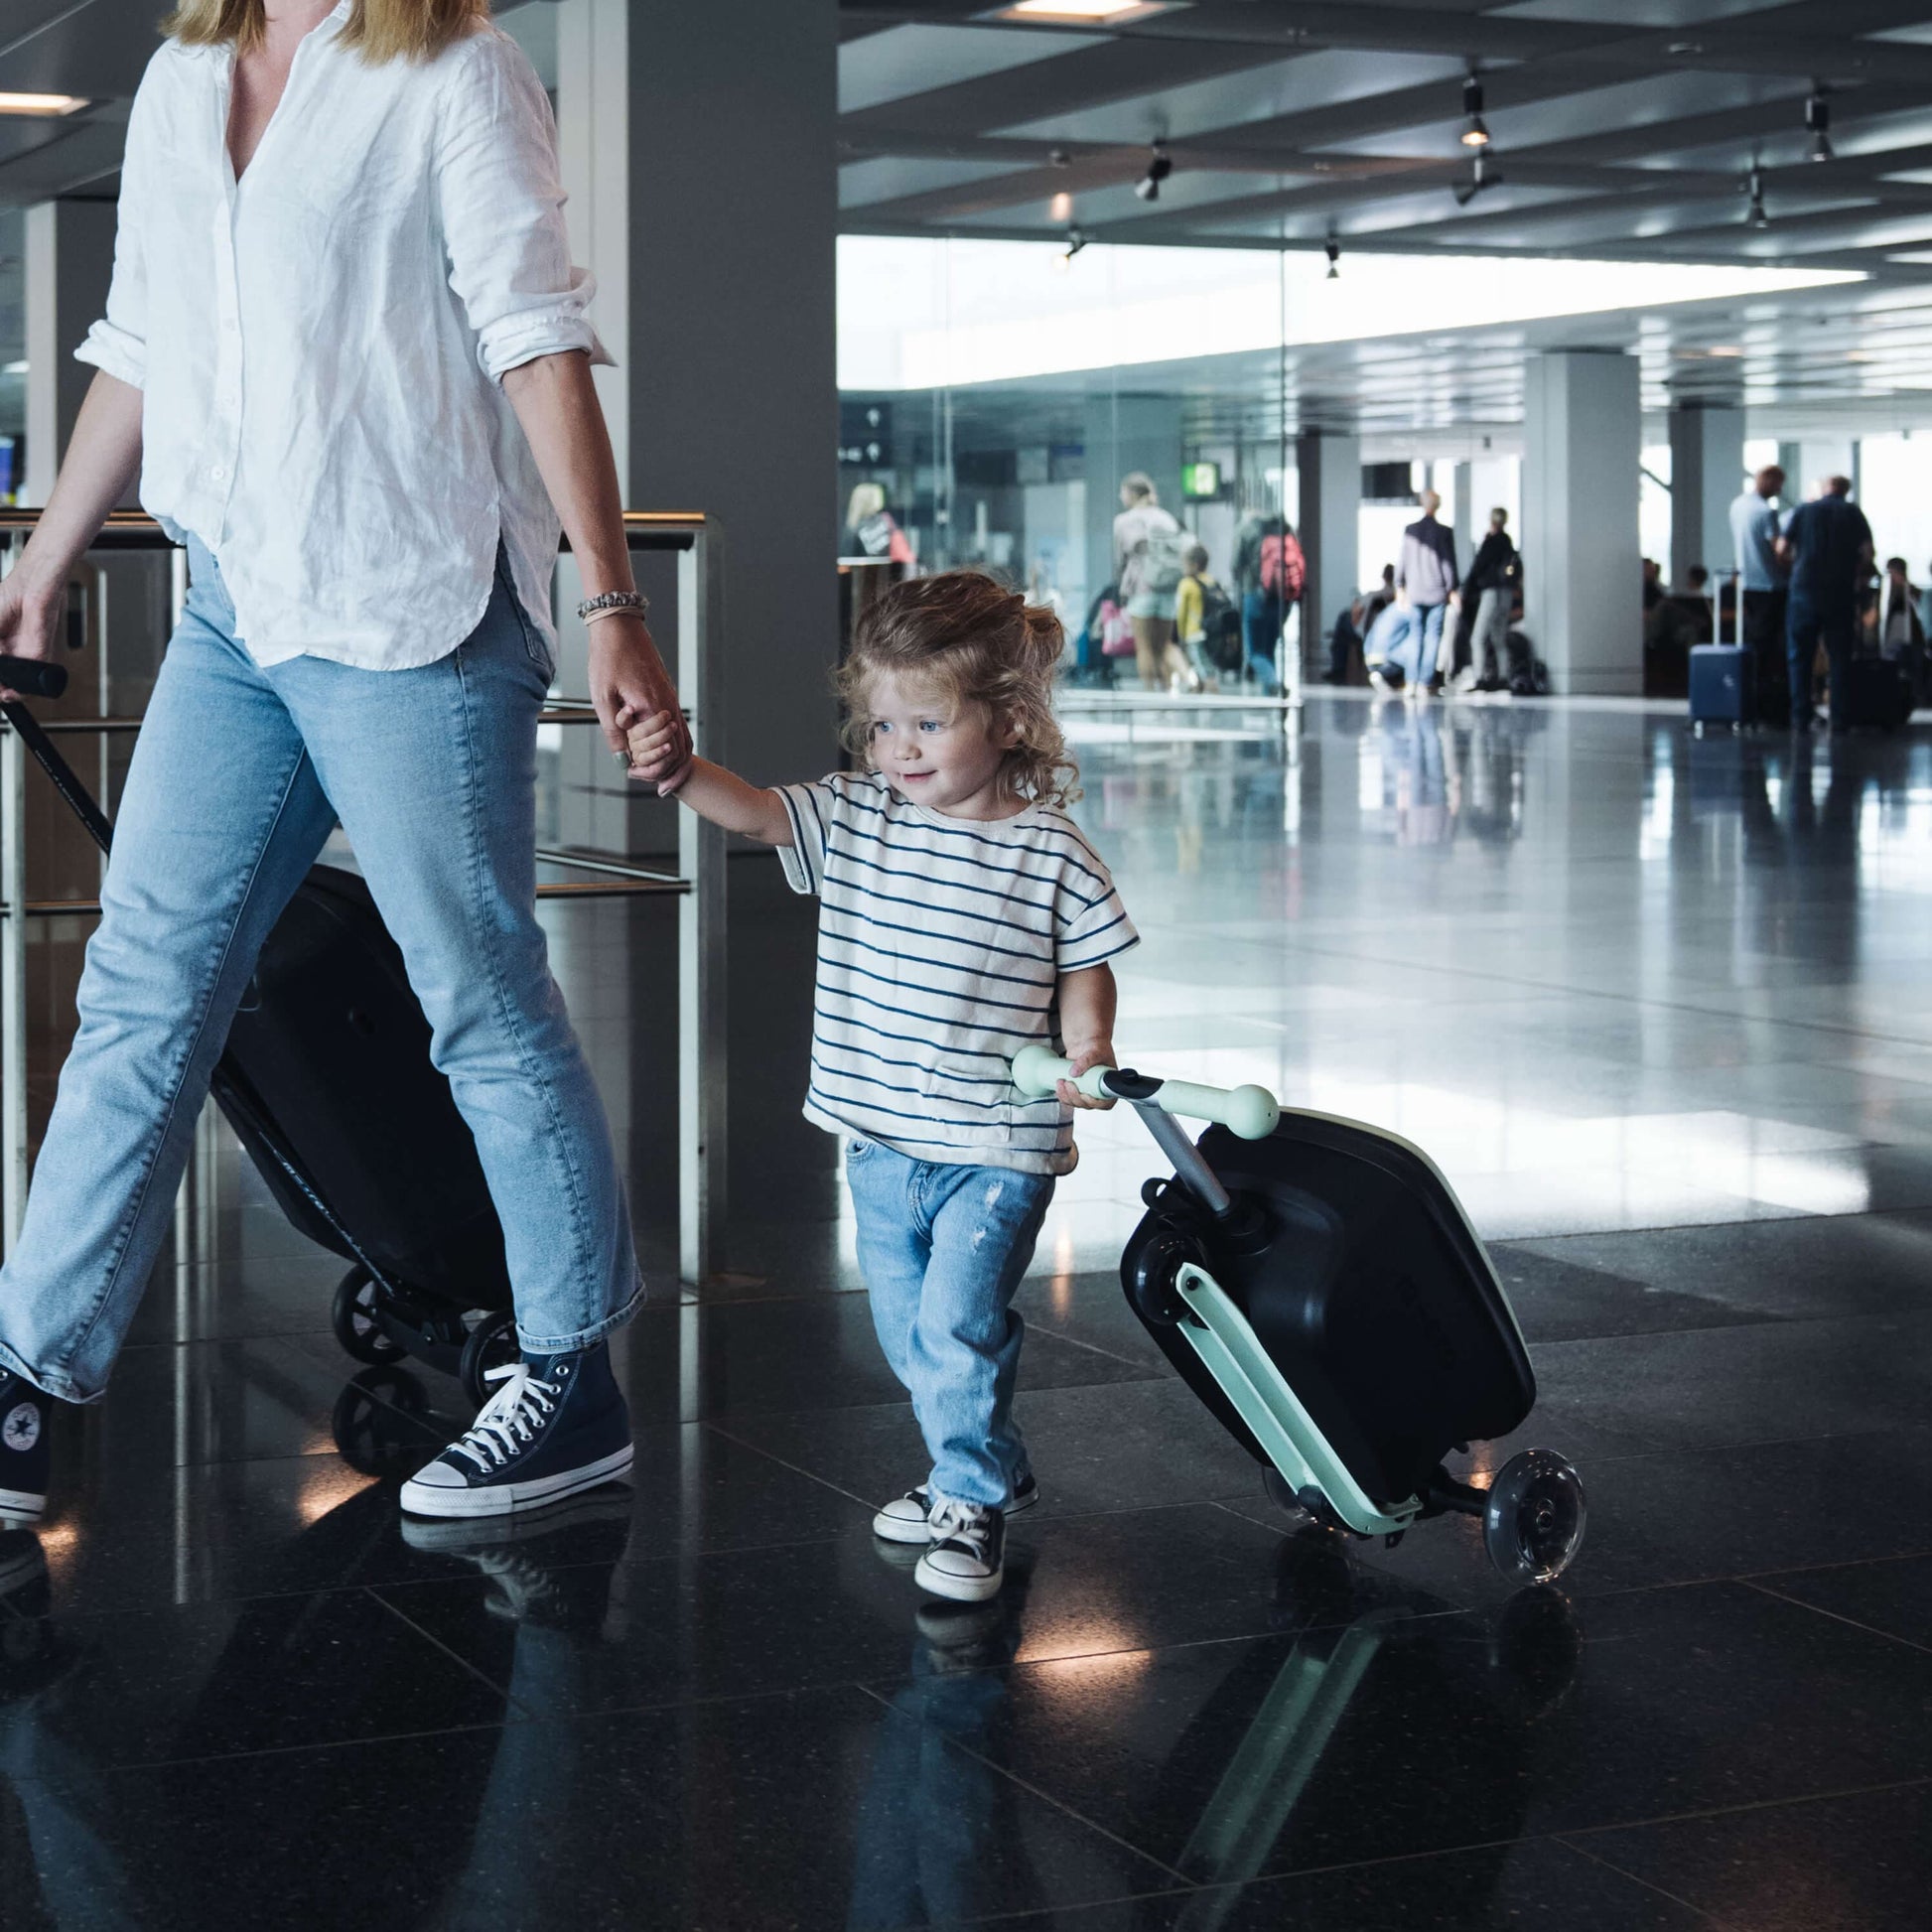 woman holding hands with child who is wheeling Micro Scooter Mini Mint Luggage Scooter through airport